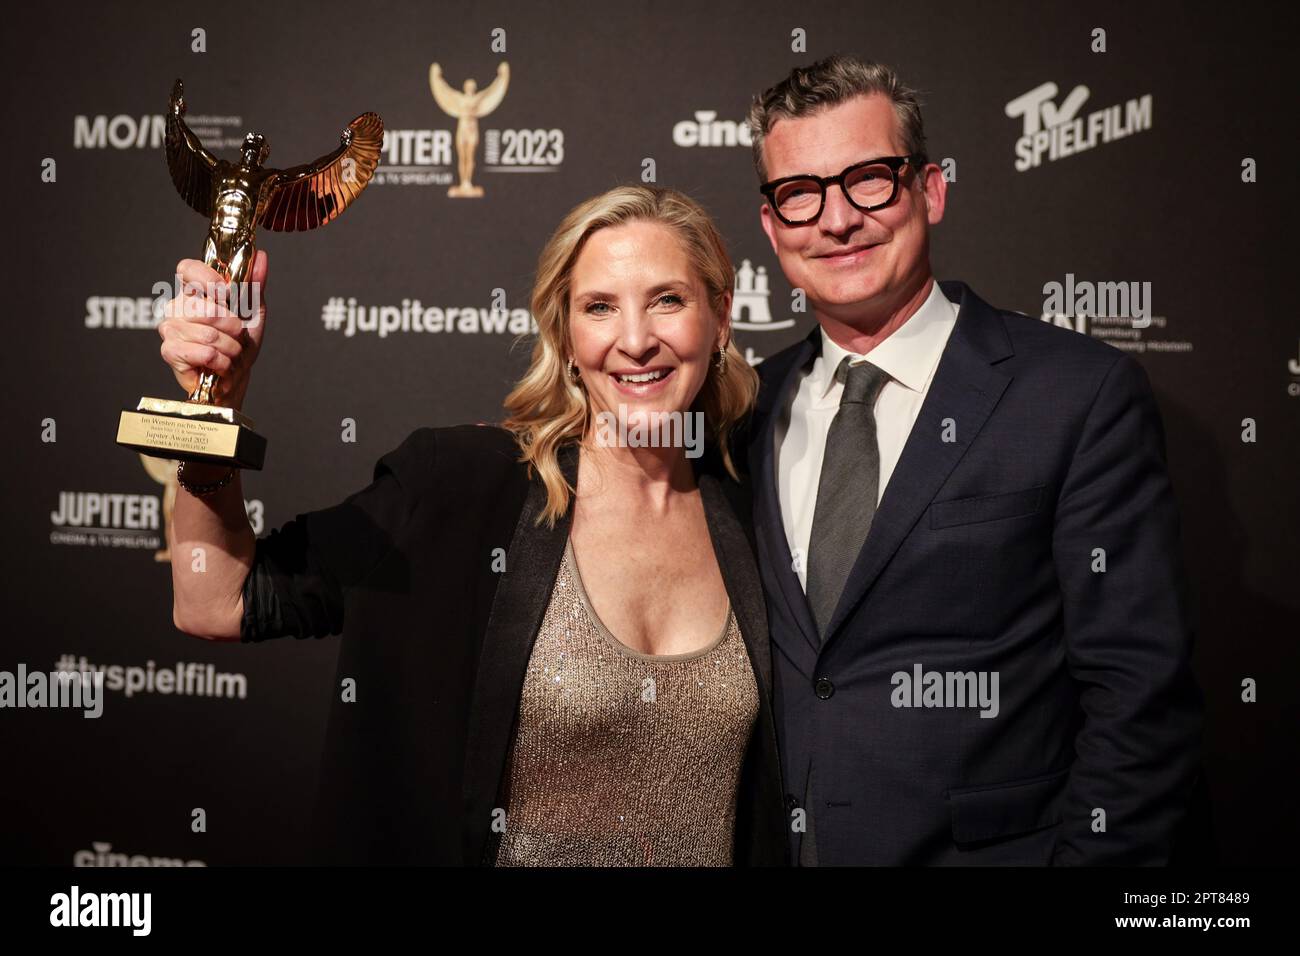 Hamburg, Germany. 27th Apr, 2023. Sasha Bühler (l), Netflix, and Malte Grunert, film producer, celebrate with their prize at the 2023 Jupiter Award ceremony. The Netflix production 'Im Westen nichts Neues' was honored as Best Film TV & Streaming (National). For the 45th time, the magazines 'TV Spielfilm' and 'Cinema' presented the audience award for outstanding film productions and stellar acting performances. Credit: Christian Charisius/dpa/Alamy Live News Stock Photo